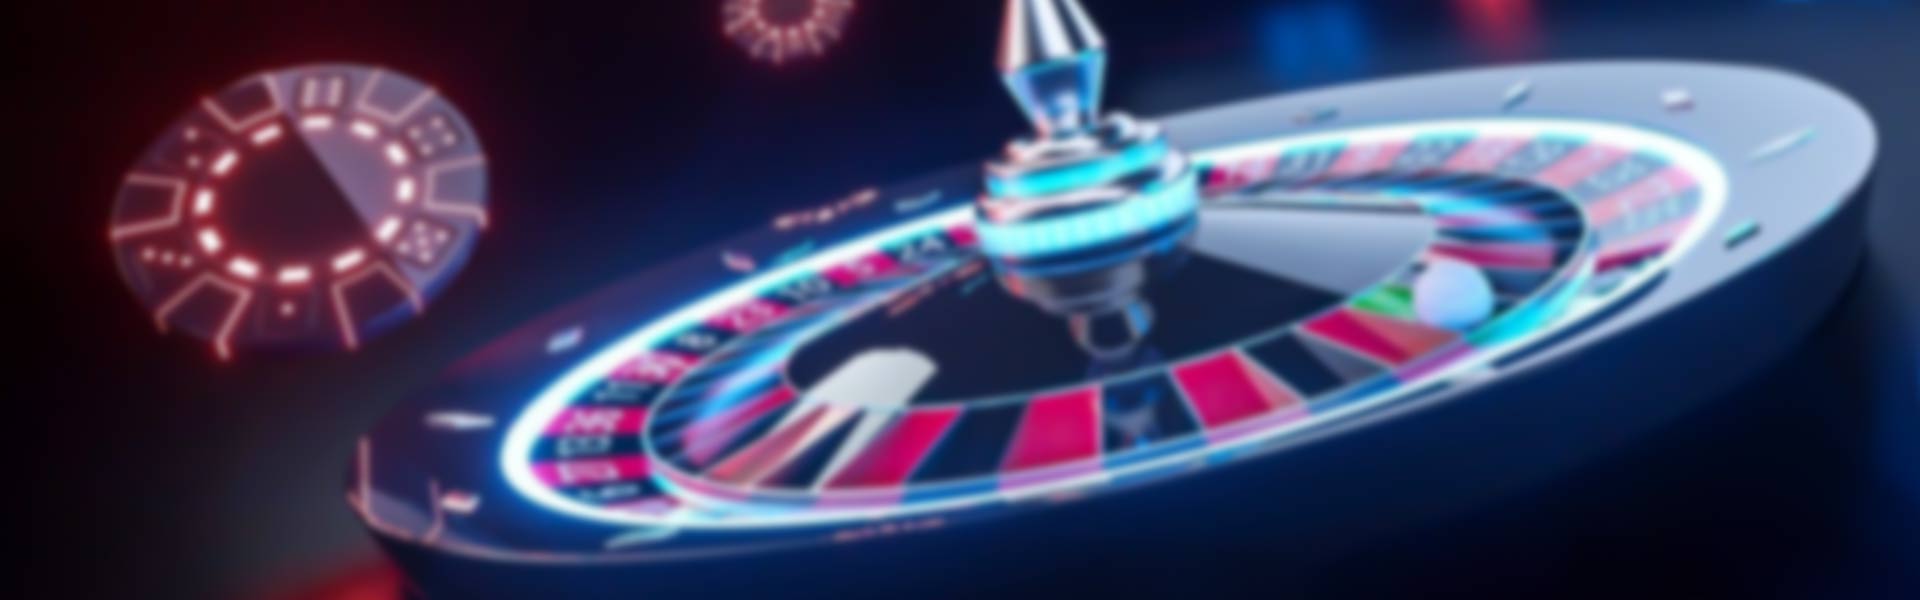 Roulette banner top